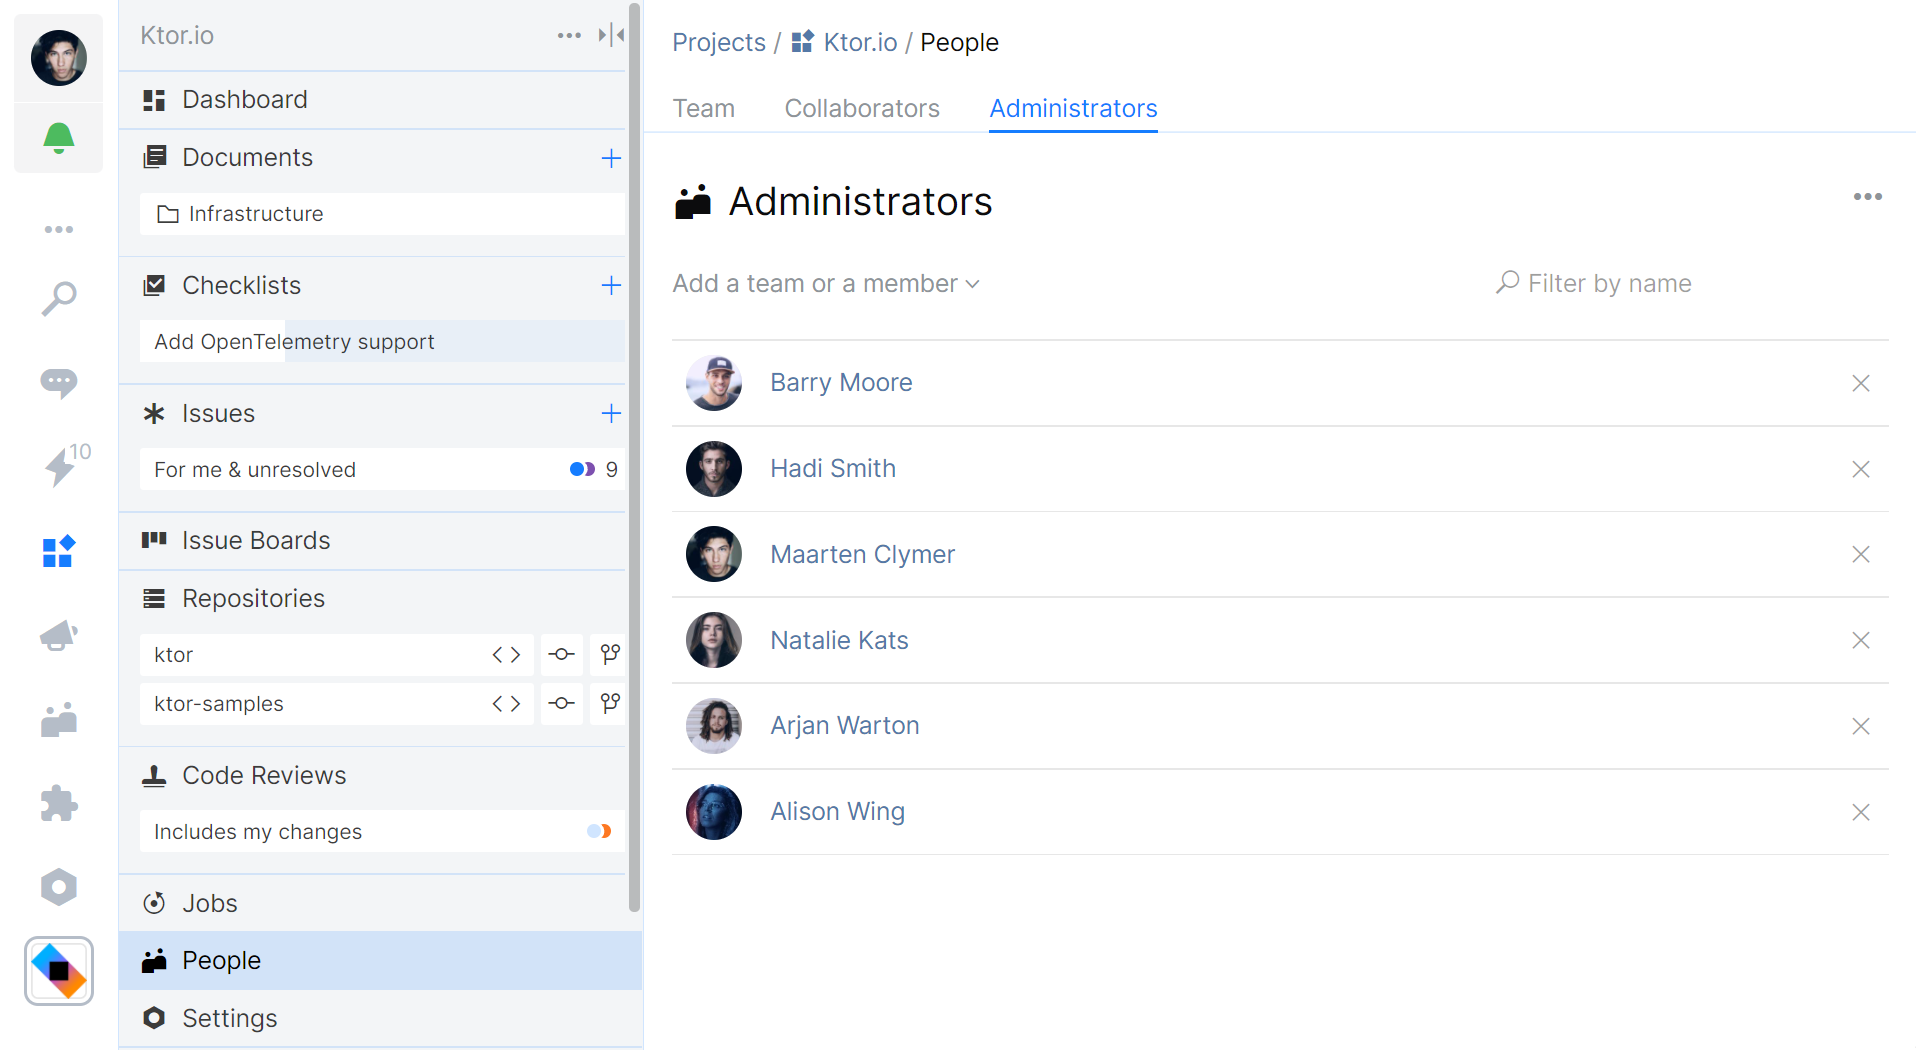 Manage project administrators